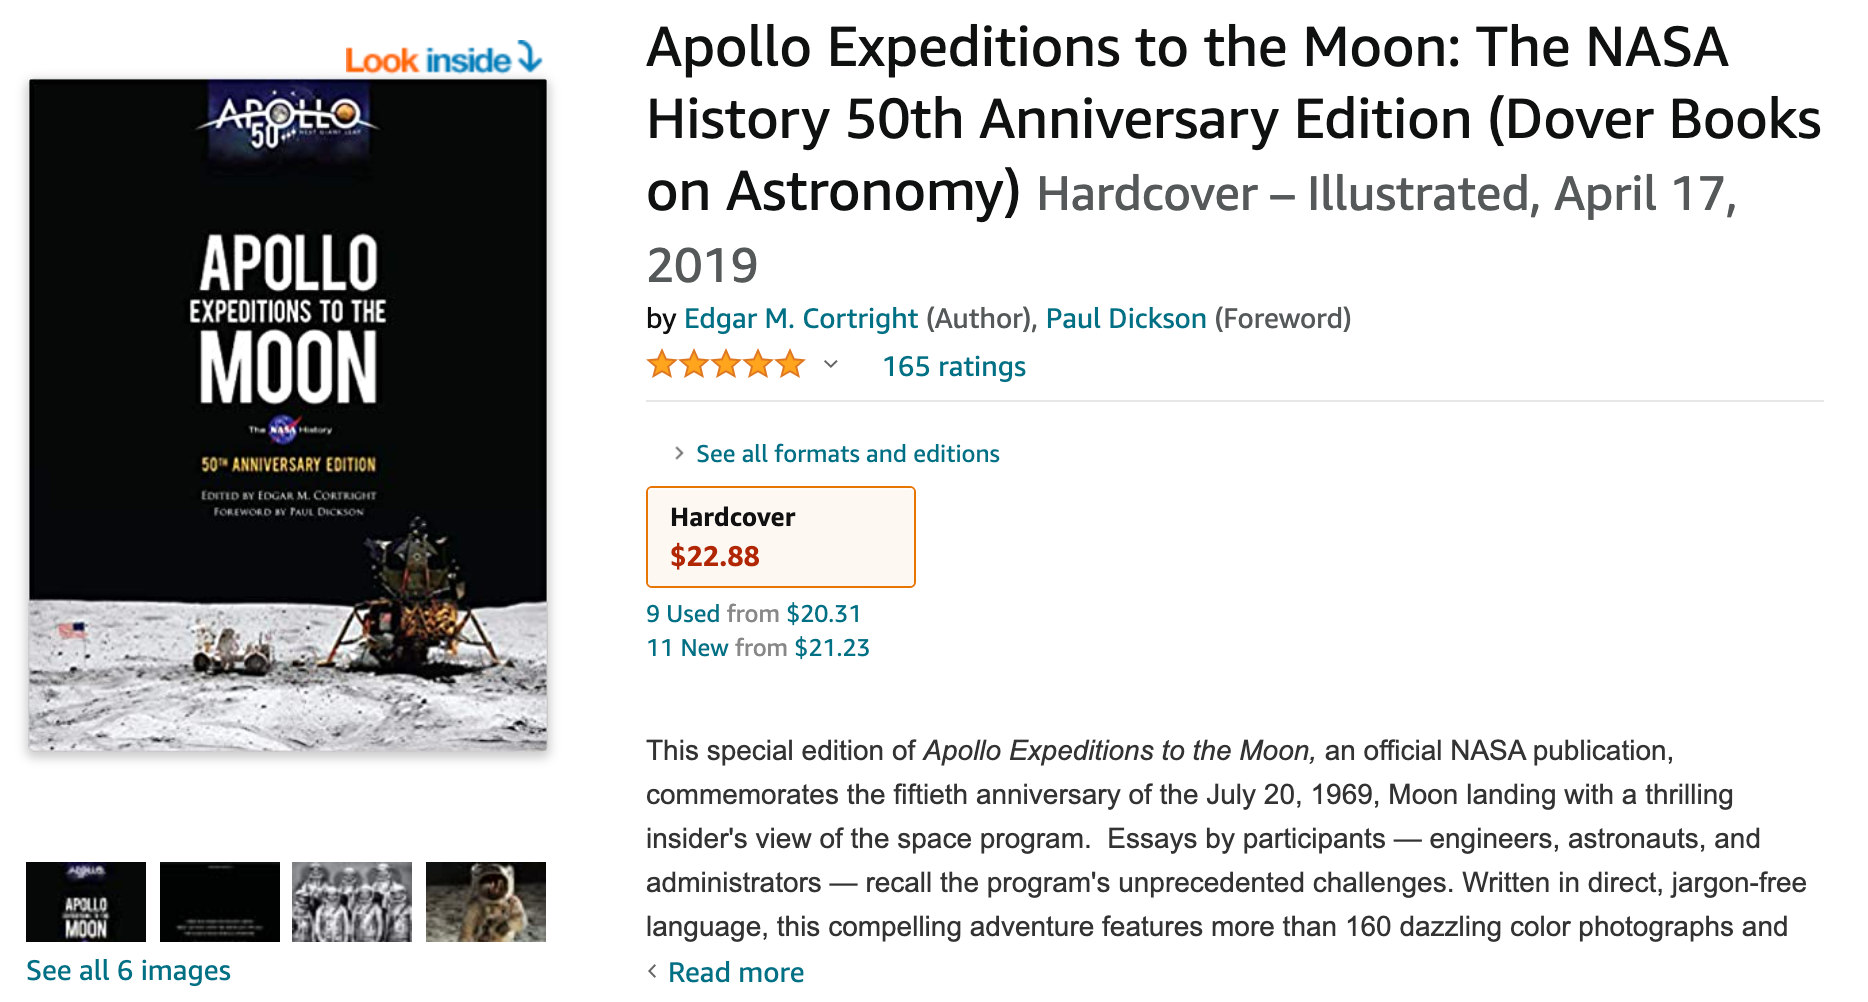 Apollo Expeditions to the Moon- The NASA History 50th Anniversary Edition.jpg